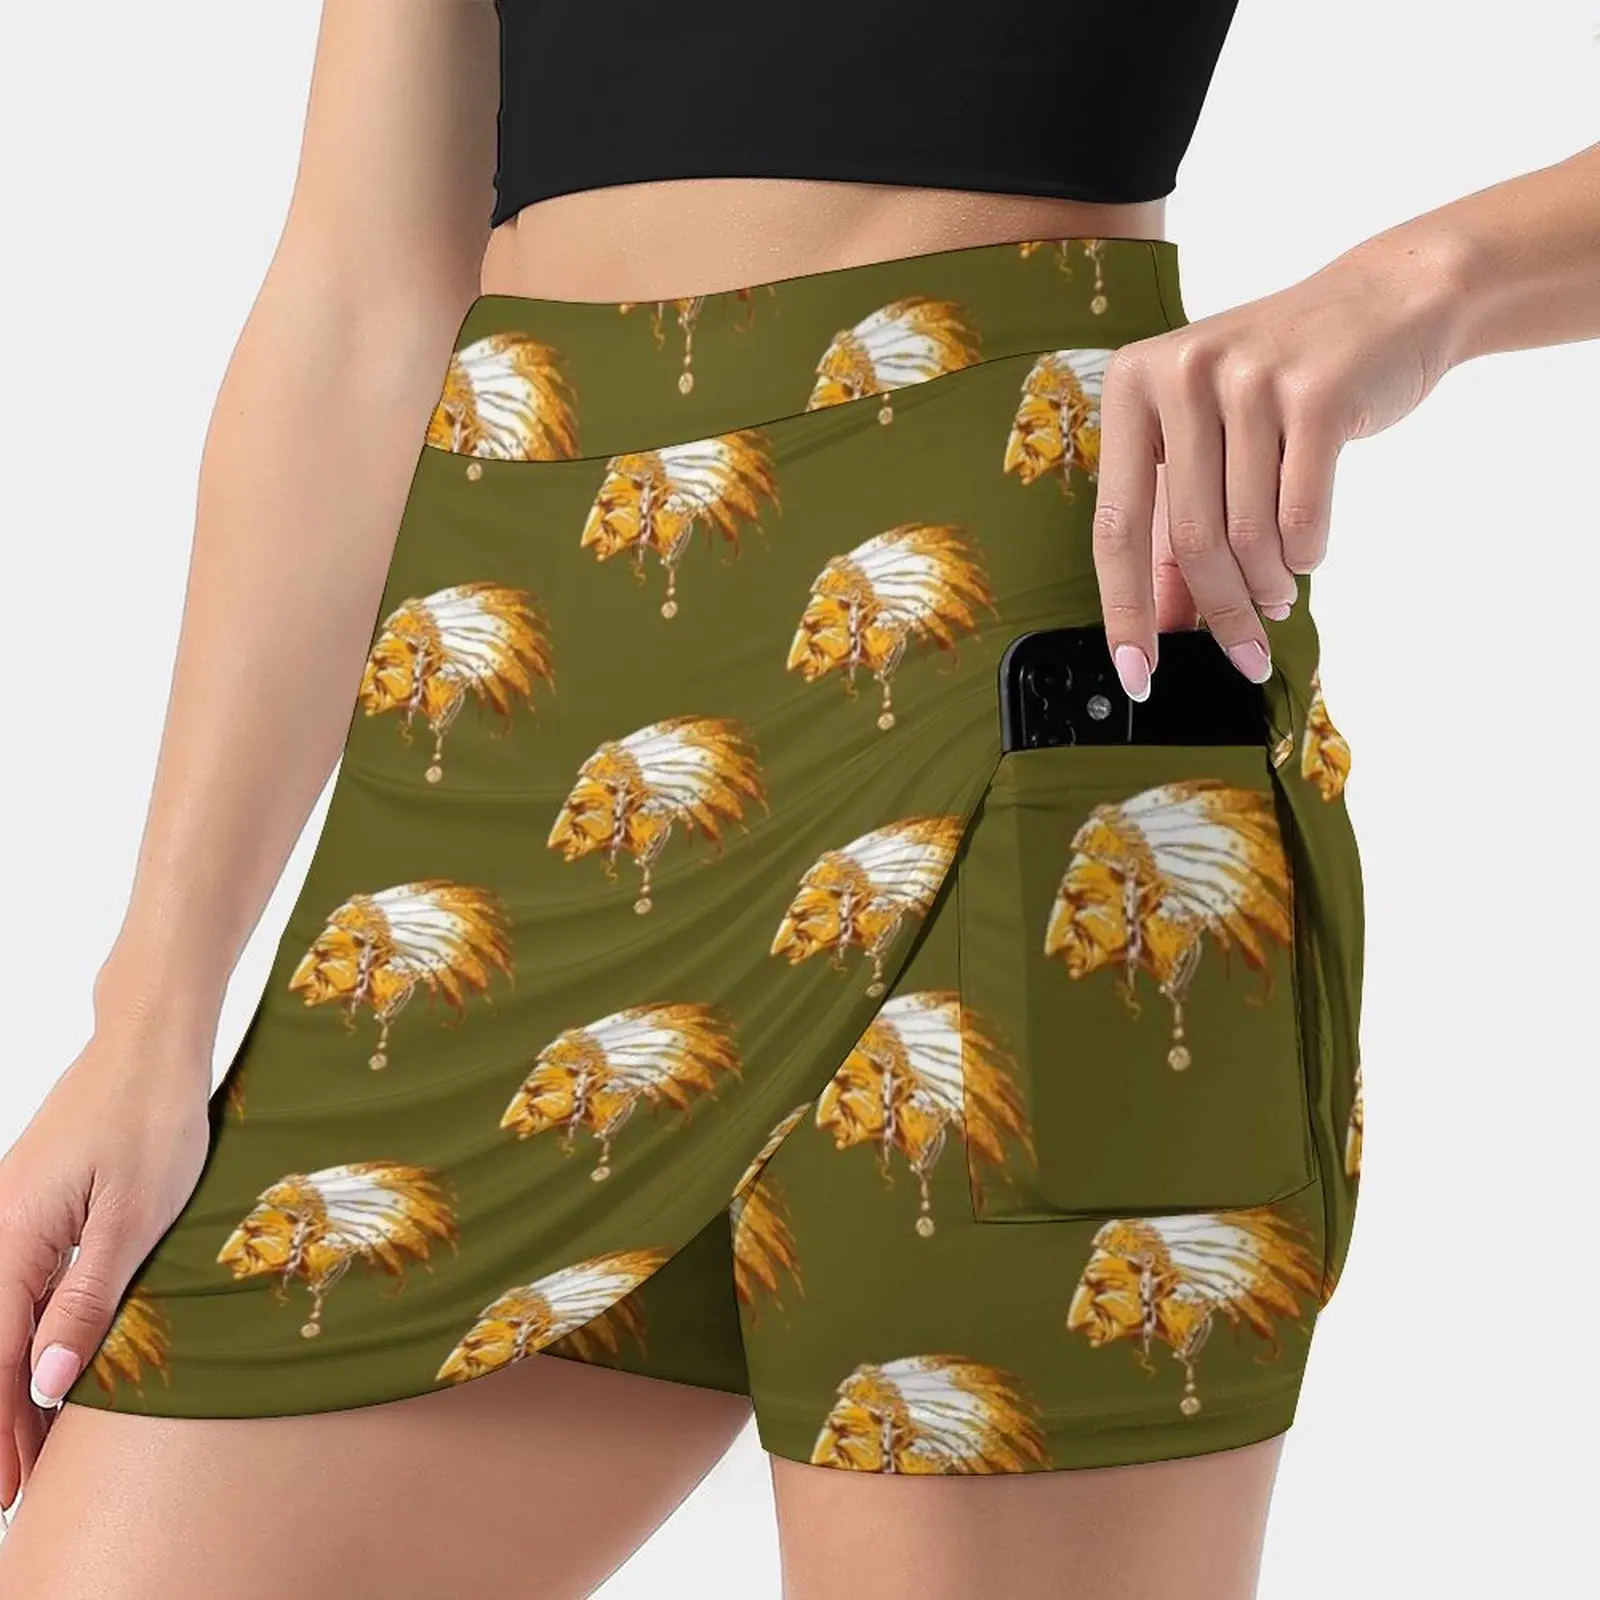 

Chief Women's skirt Aesthetic skirts New Fashion Short Skirts Orange Profile Chris Native Head Feathers Chief Wahl